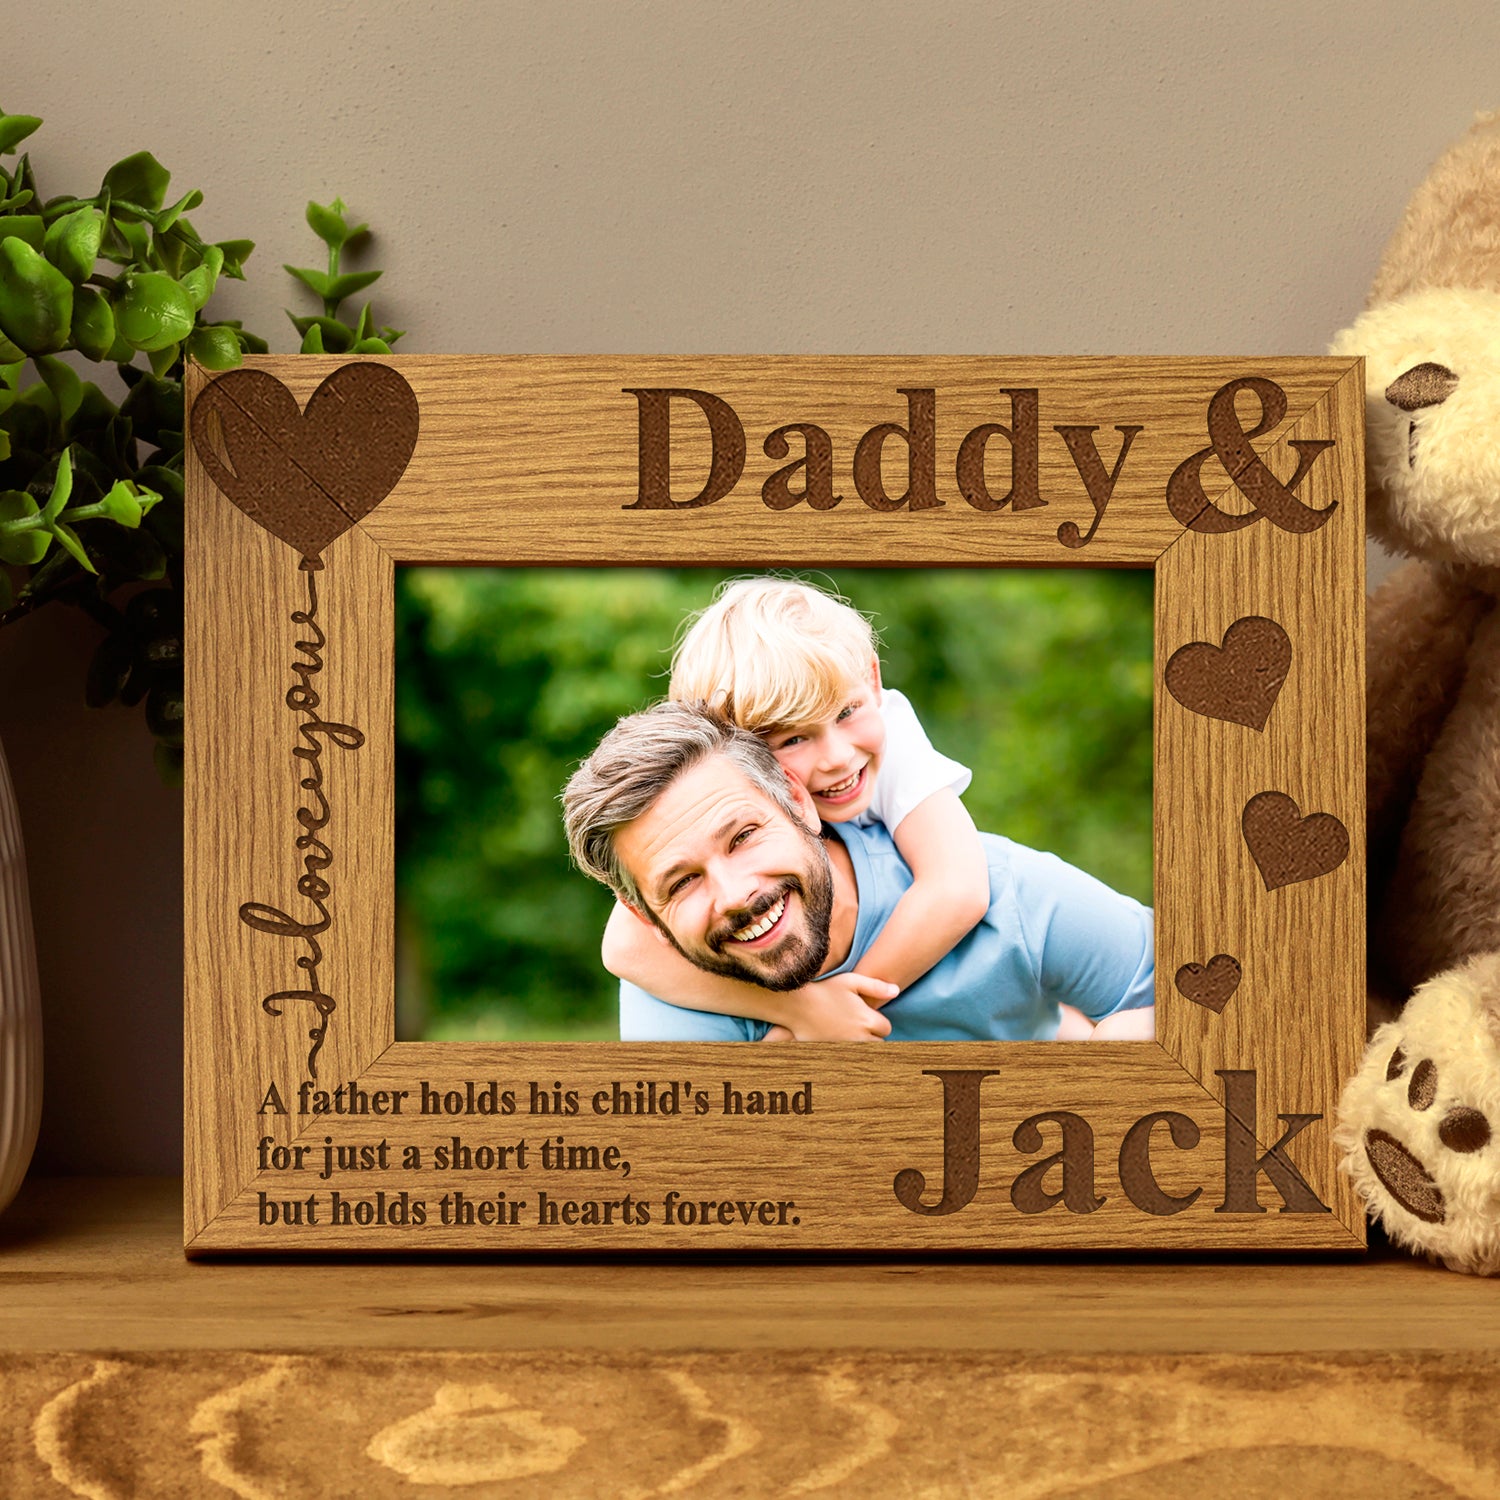 Personalised Daddy and Son or Daughter Heart Wooden Photo Frame Gift - ukgiftstoreonline